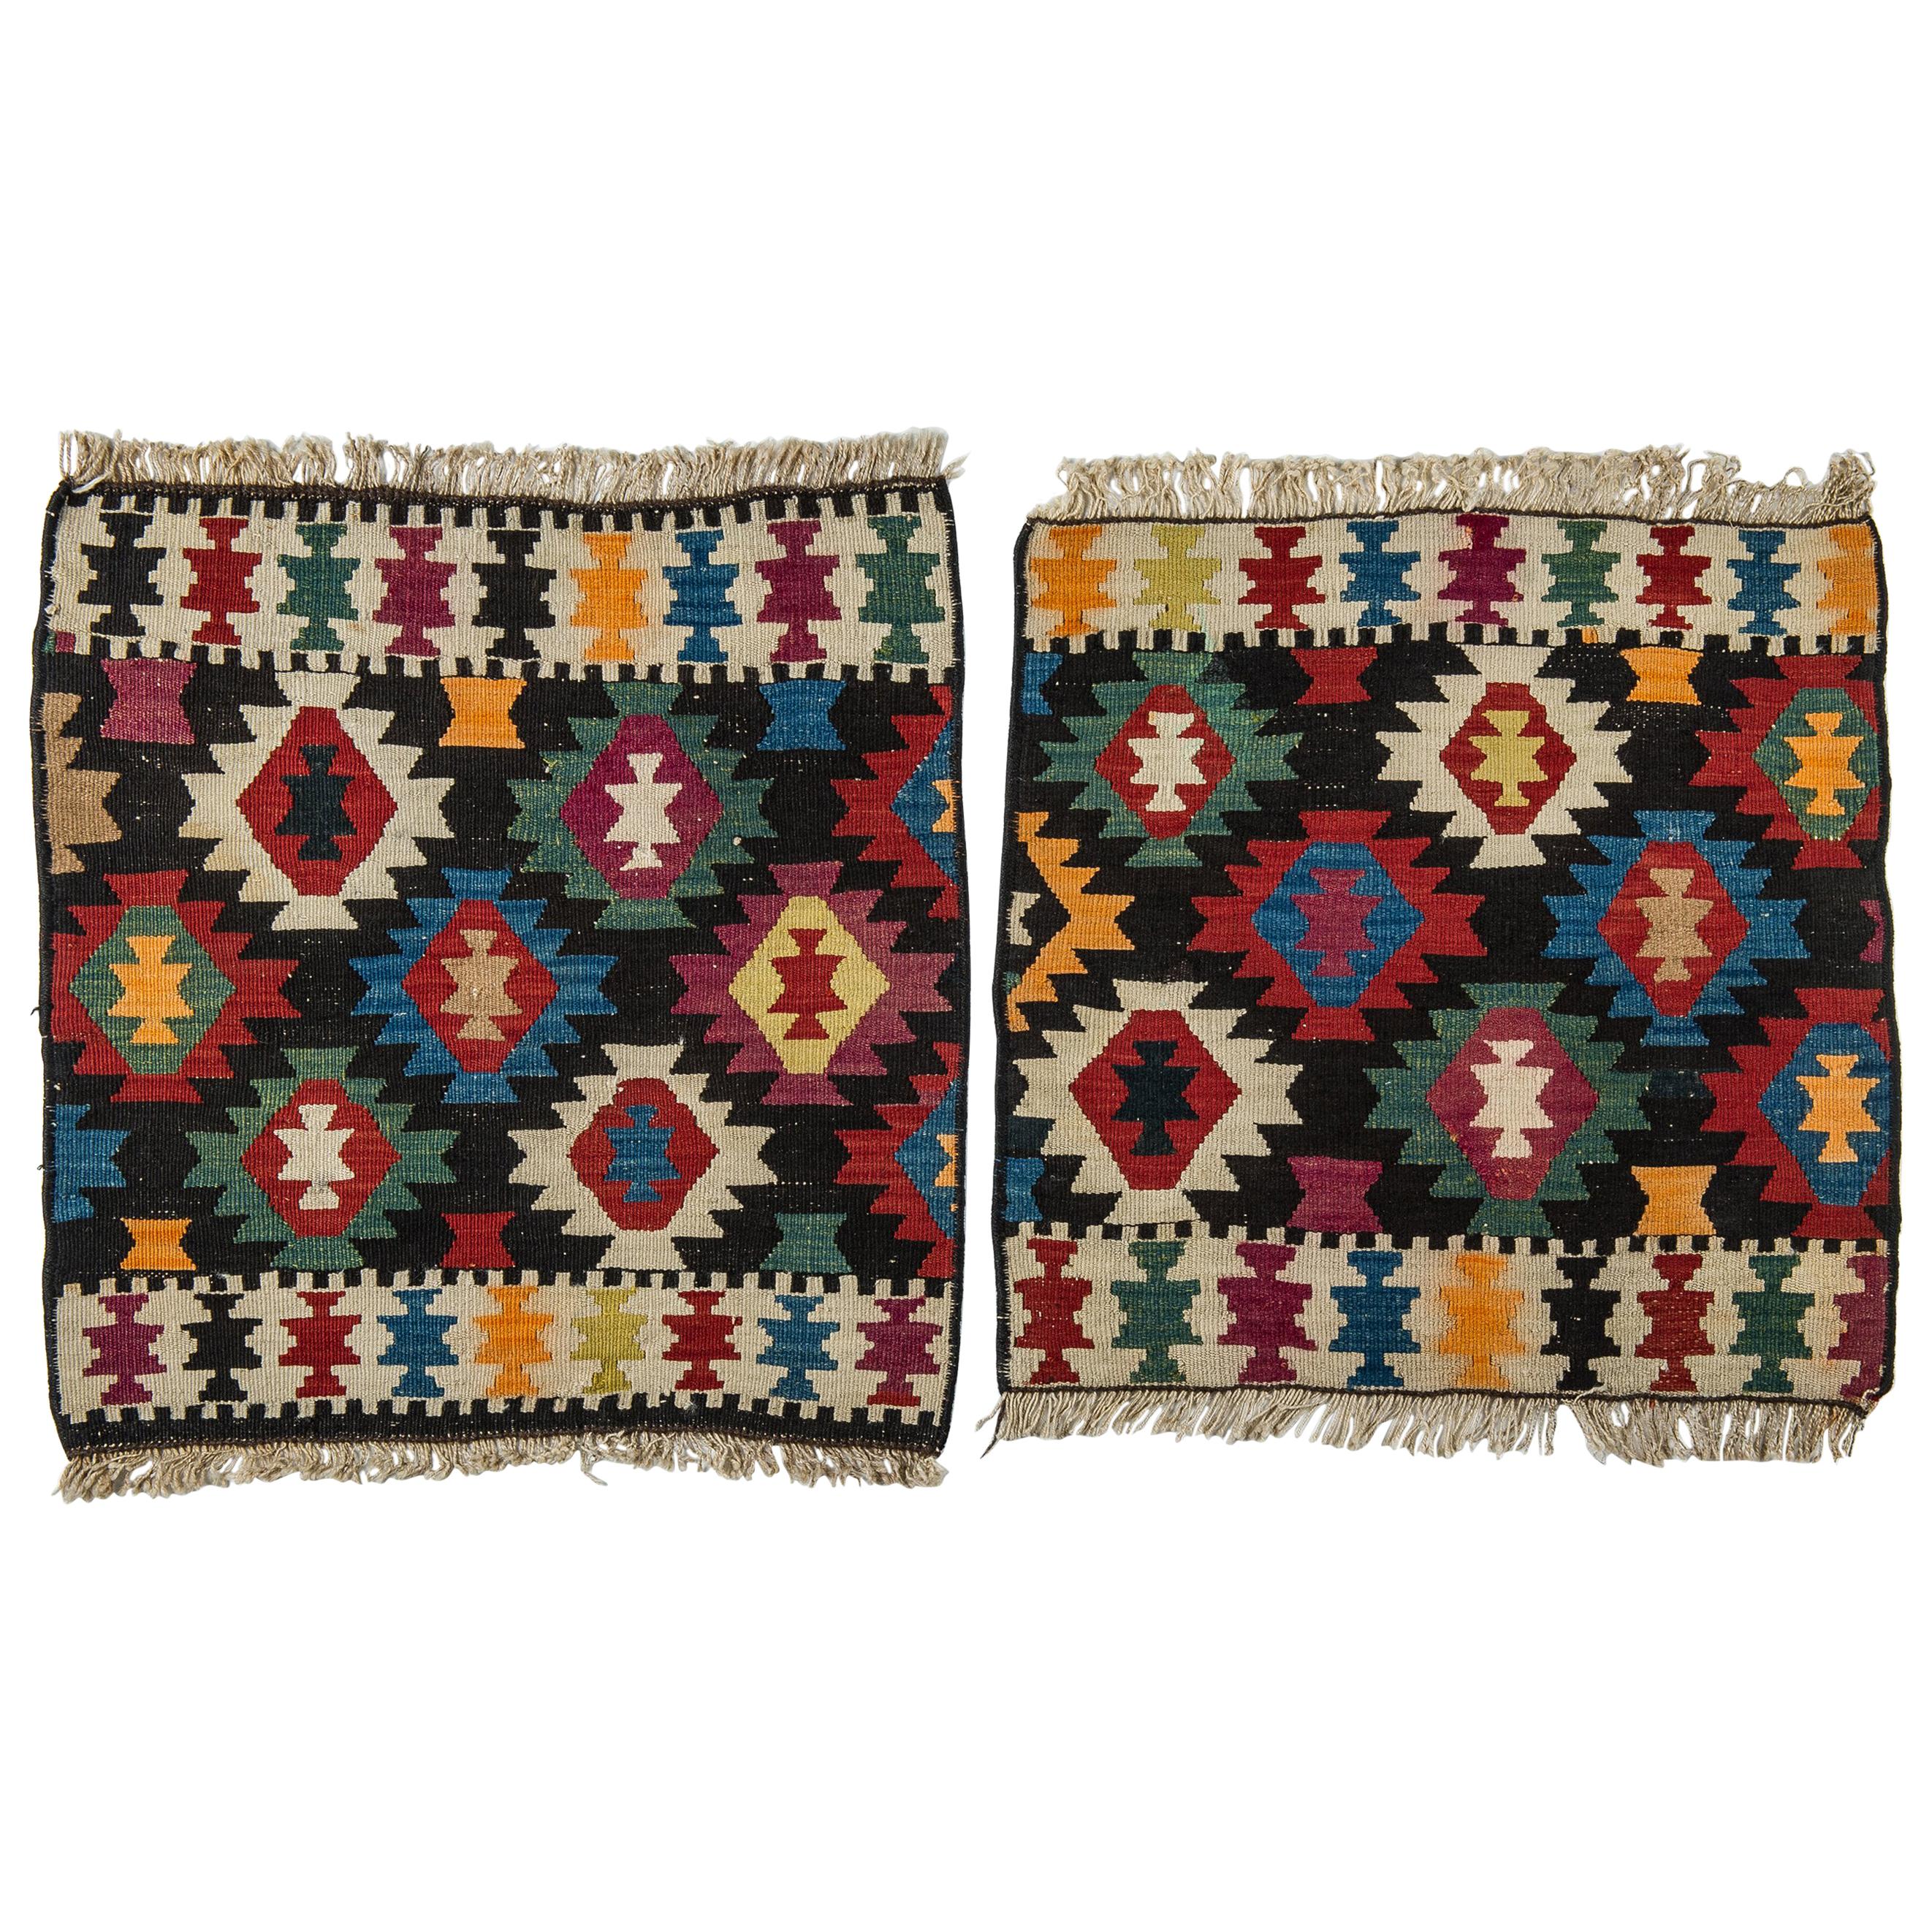  Rare Little Pair Kilims Azeri or Shahsavan for Stools or Special Pillows For Sale